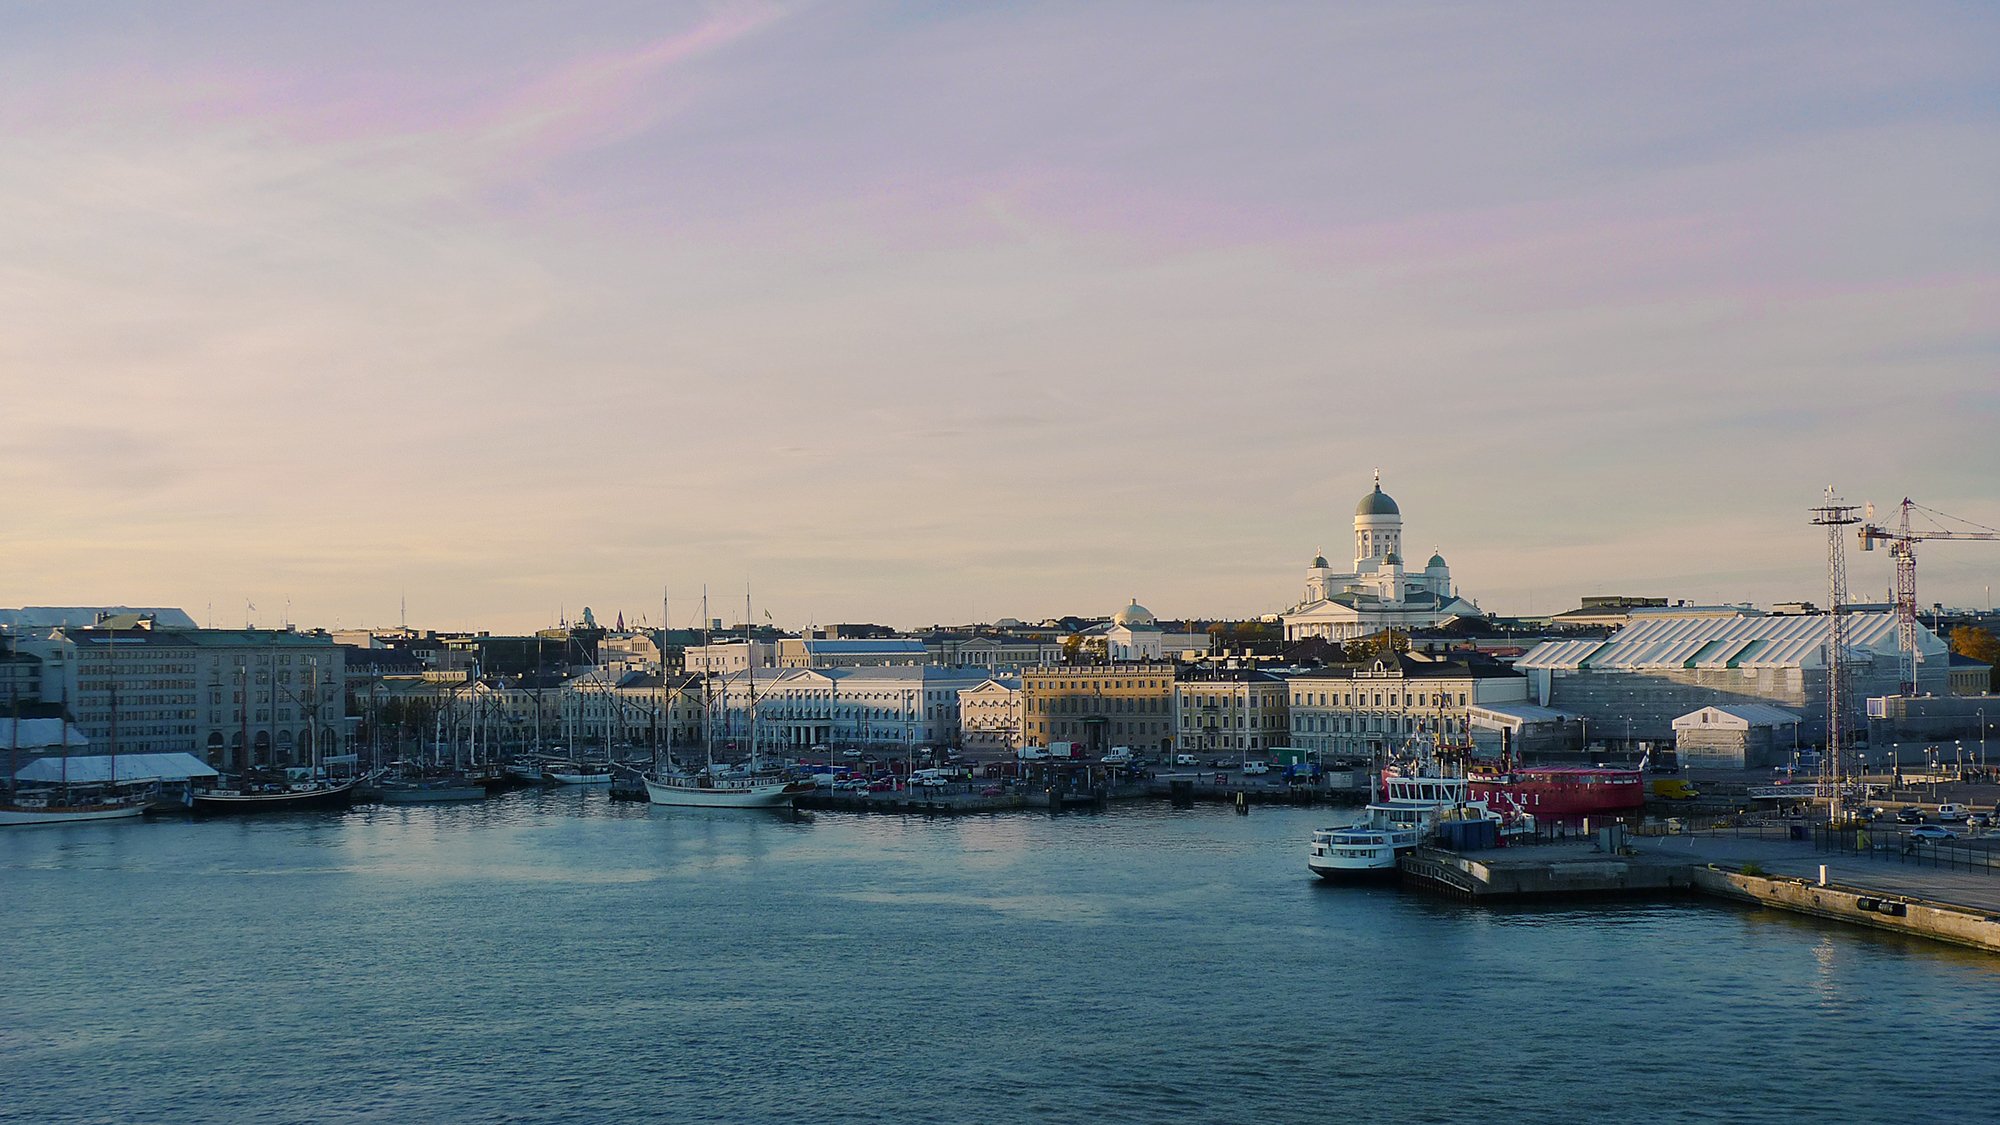 Sitra, the Finnish Innovation Fund is working on solutions to challenge climate change. 